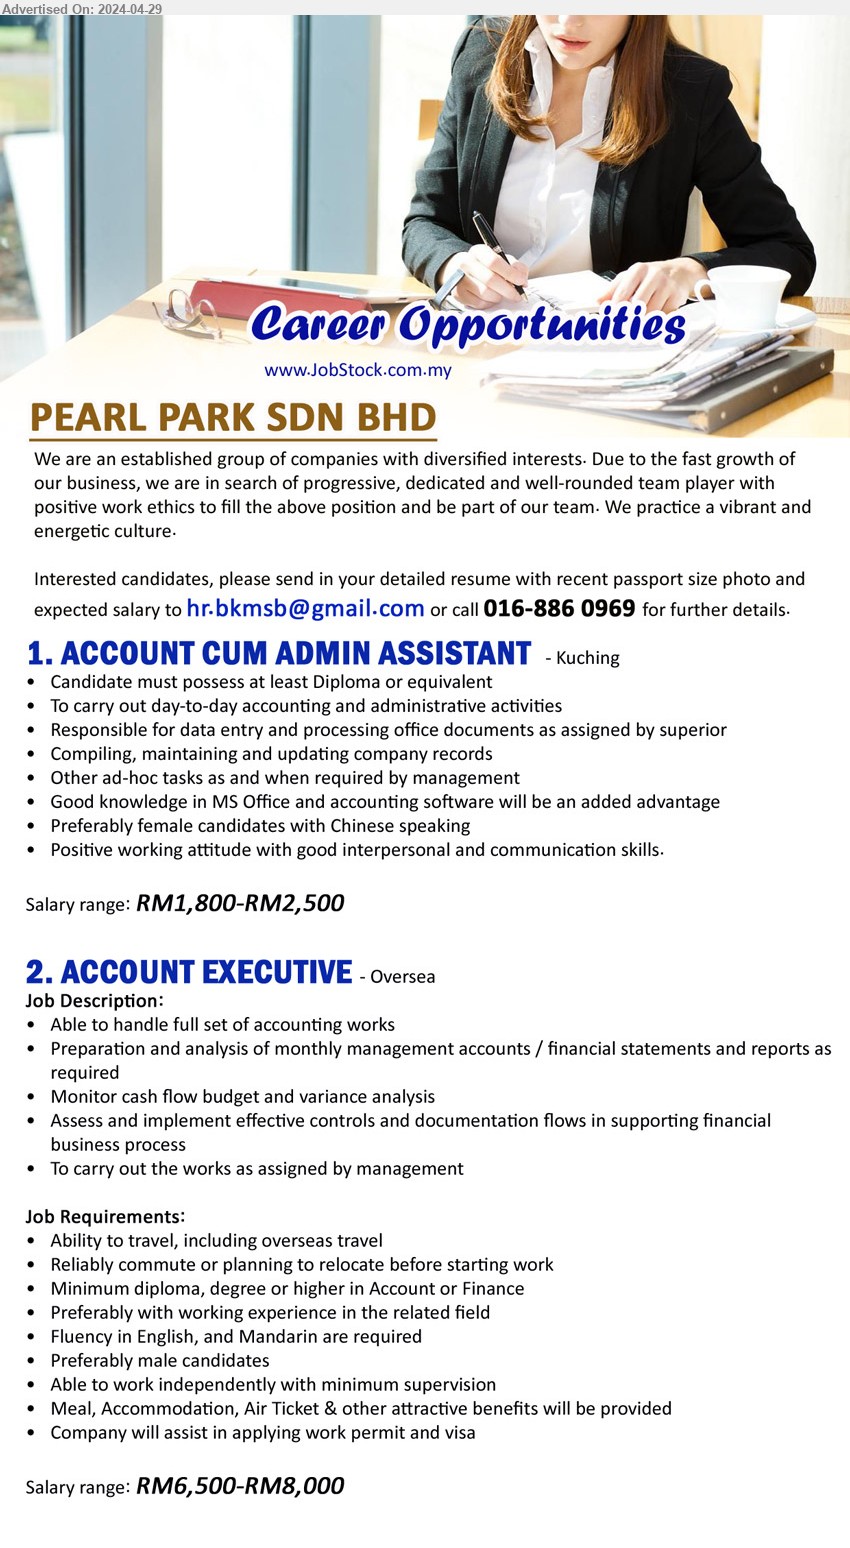 PEARL PARK SDN BHD - 1. ACCOUNT CUM ADMIN ASSISTANT (Kuching), RM1,800-RM2,500, Diploma, Good knowledge in MS Office and accounting software will be an added advantage,...
2. ACCOUNT EXECUTIVE (Oversea), RM6,500-RM8,000, diploma, degree or higher in Account or Finance, Meal, Accommodation, Air Ticket & other attractive benefits will be provided,...
Call 016-8860969 / Email resume to ...
